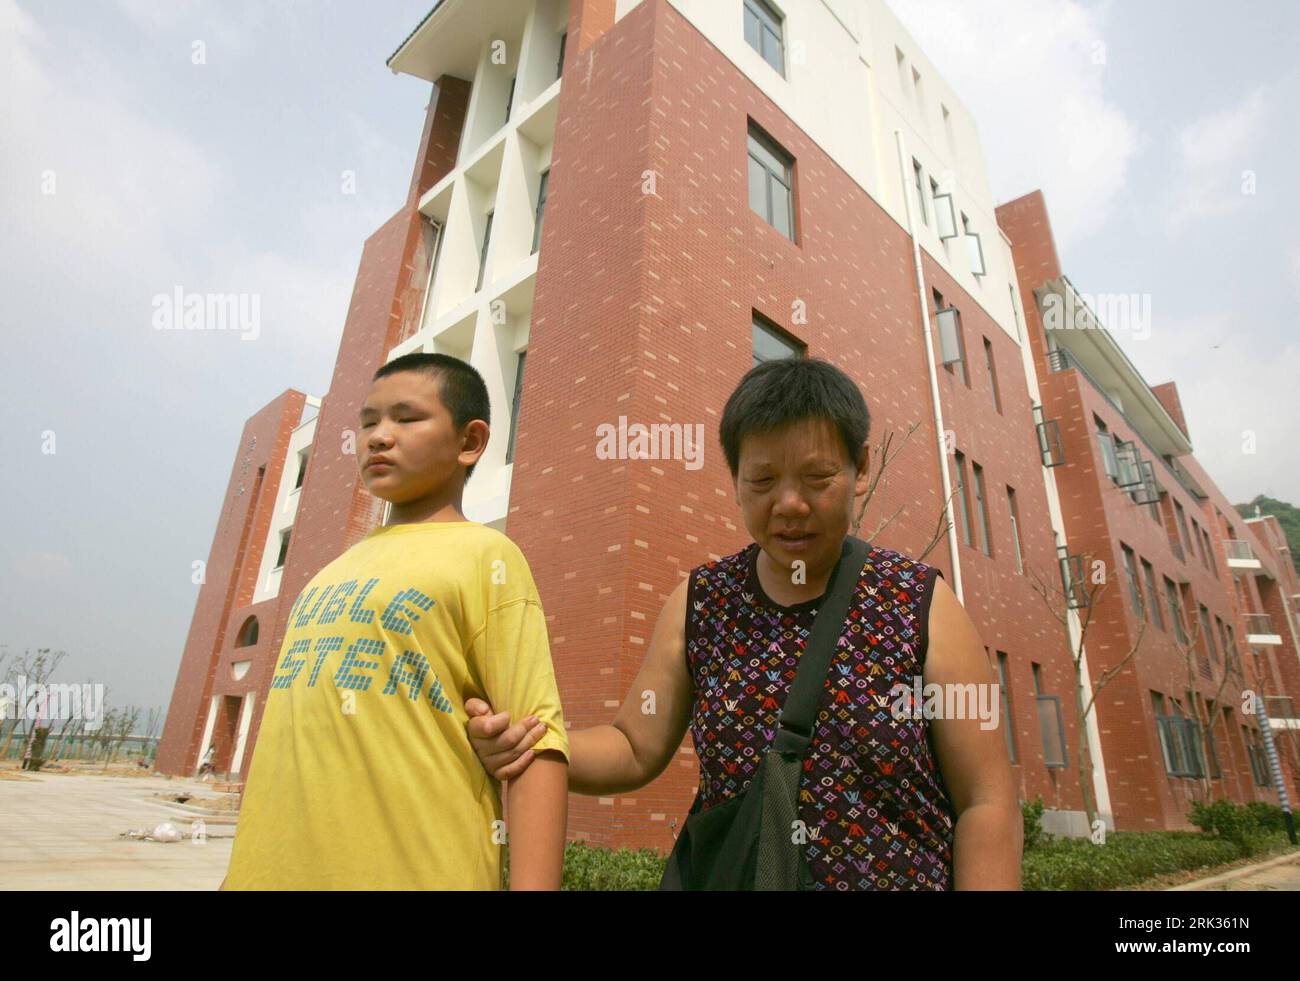 Bildnummer: 53330746  Datum: 08.09.2009  Copyright: imago/Xinhua WENZHOU, Sept 8, 2009 (Xinhua) -- A sight-impaired student walks with his mother around the school yard of Wenzhou Special School in Wenzhou City of east China s Zhejiang Province. Wenzhou Special School welcomed the first batch of sixty students from the former Wenzhou School for the Sight-impaired on Monday. Located in Yongjia County of Wenzhou, the newly built Wenzhou Special School covers an area of about 11 hectares and receives the sight-impaired, hearing-impaired and mentally-retarded children for 15-year schooling. (Xinhu Stock Photo